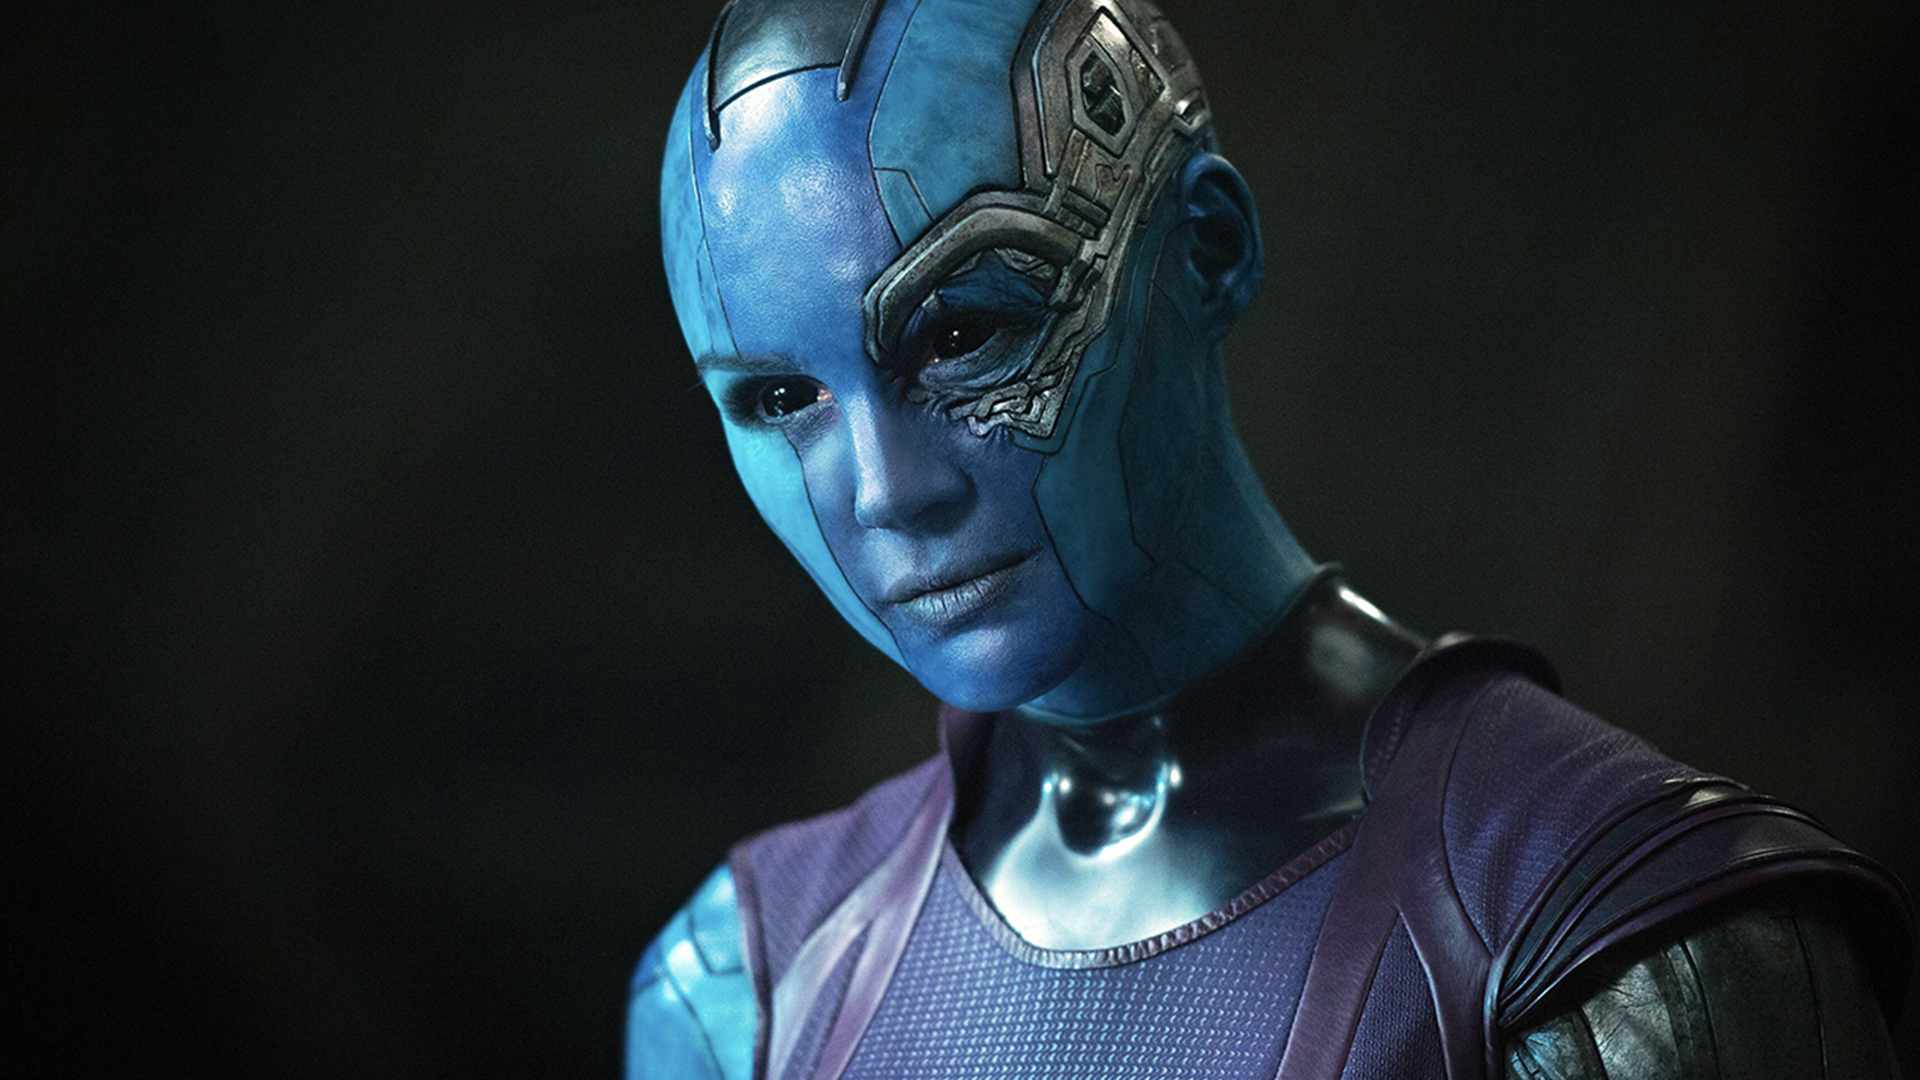 Nebula from Guardians of the Galaxy